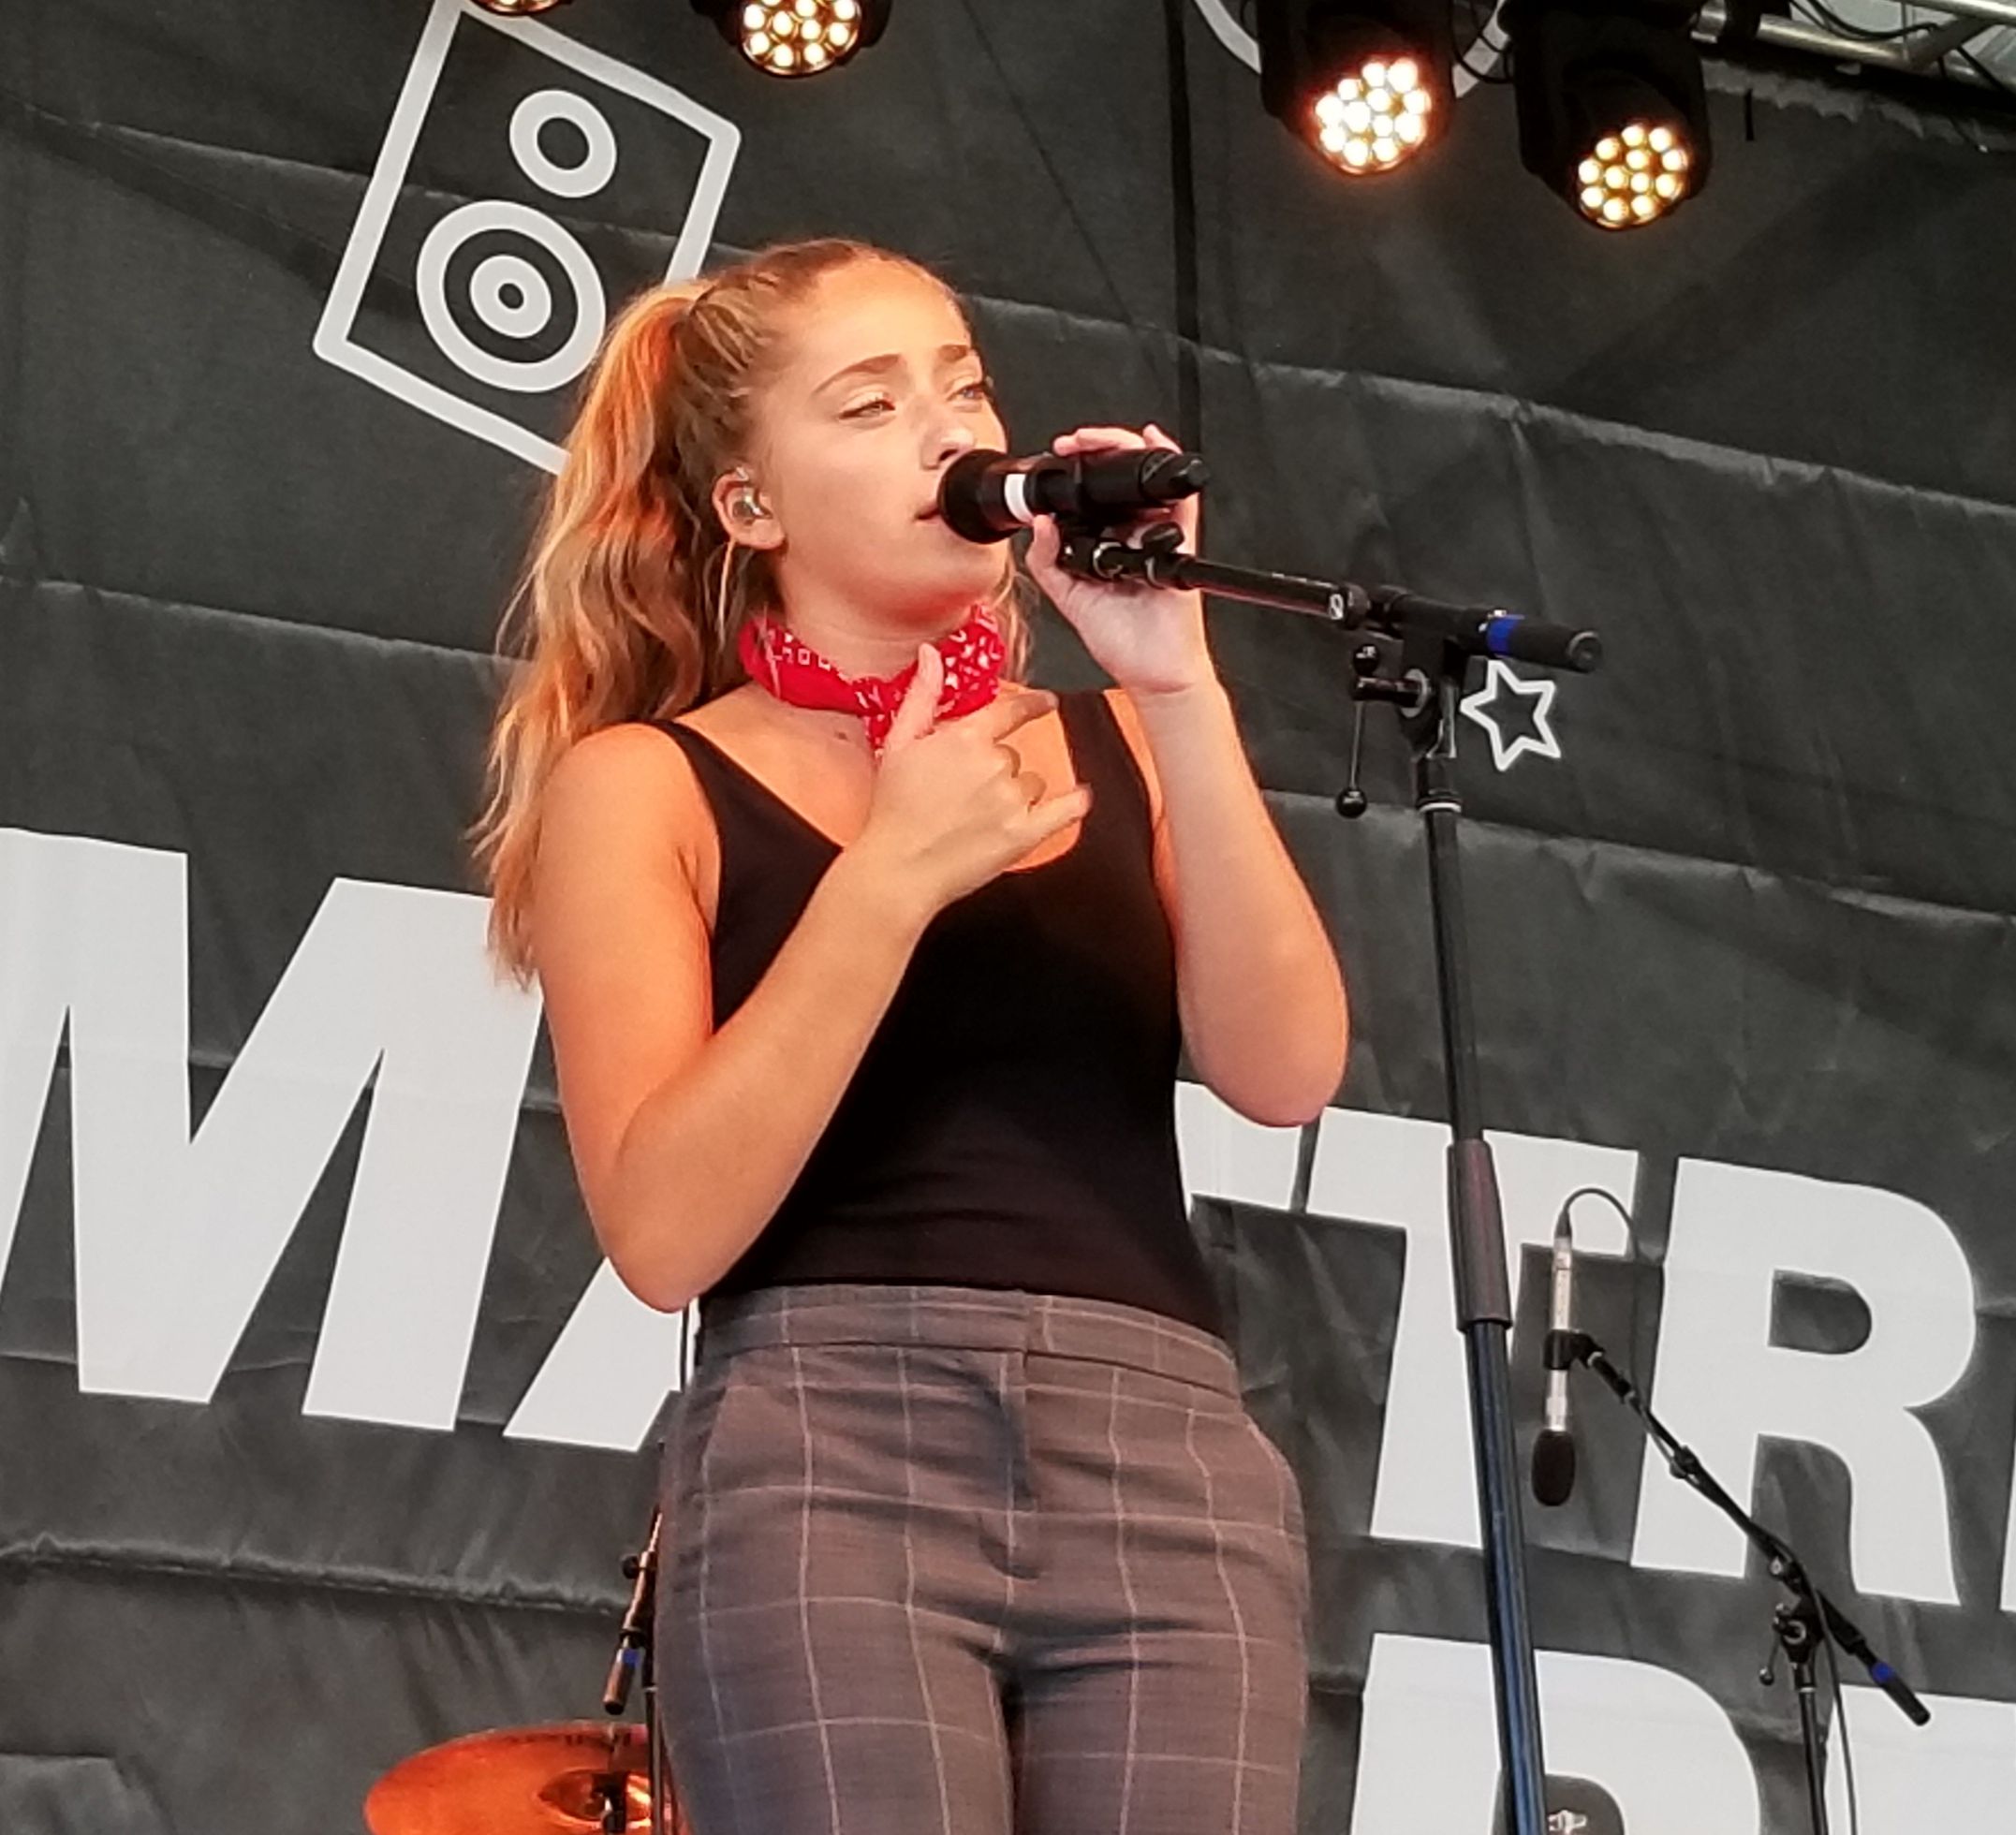 Brynn Cartelli - Songs, Events and Music Stats